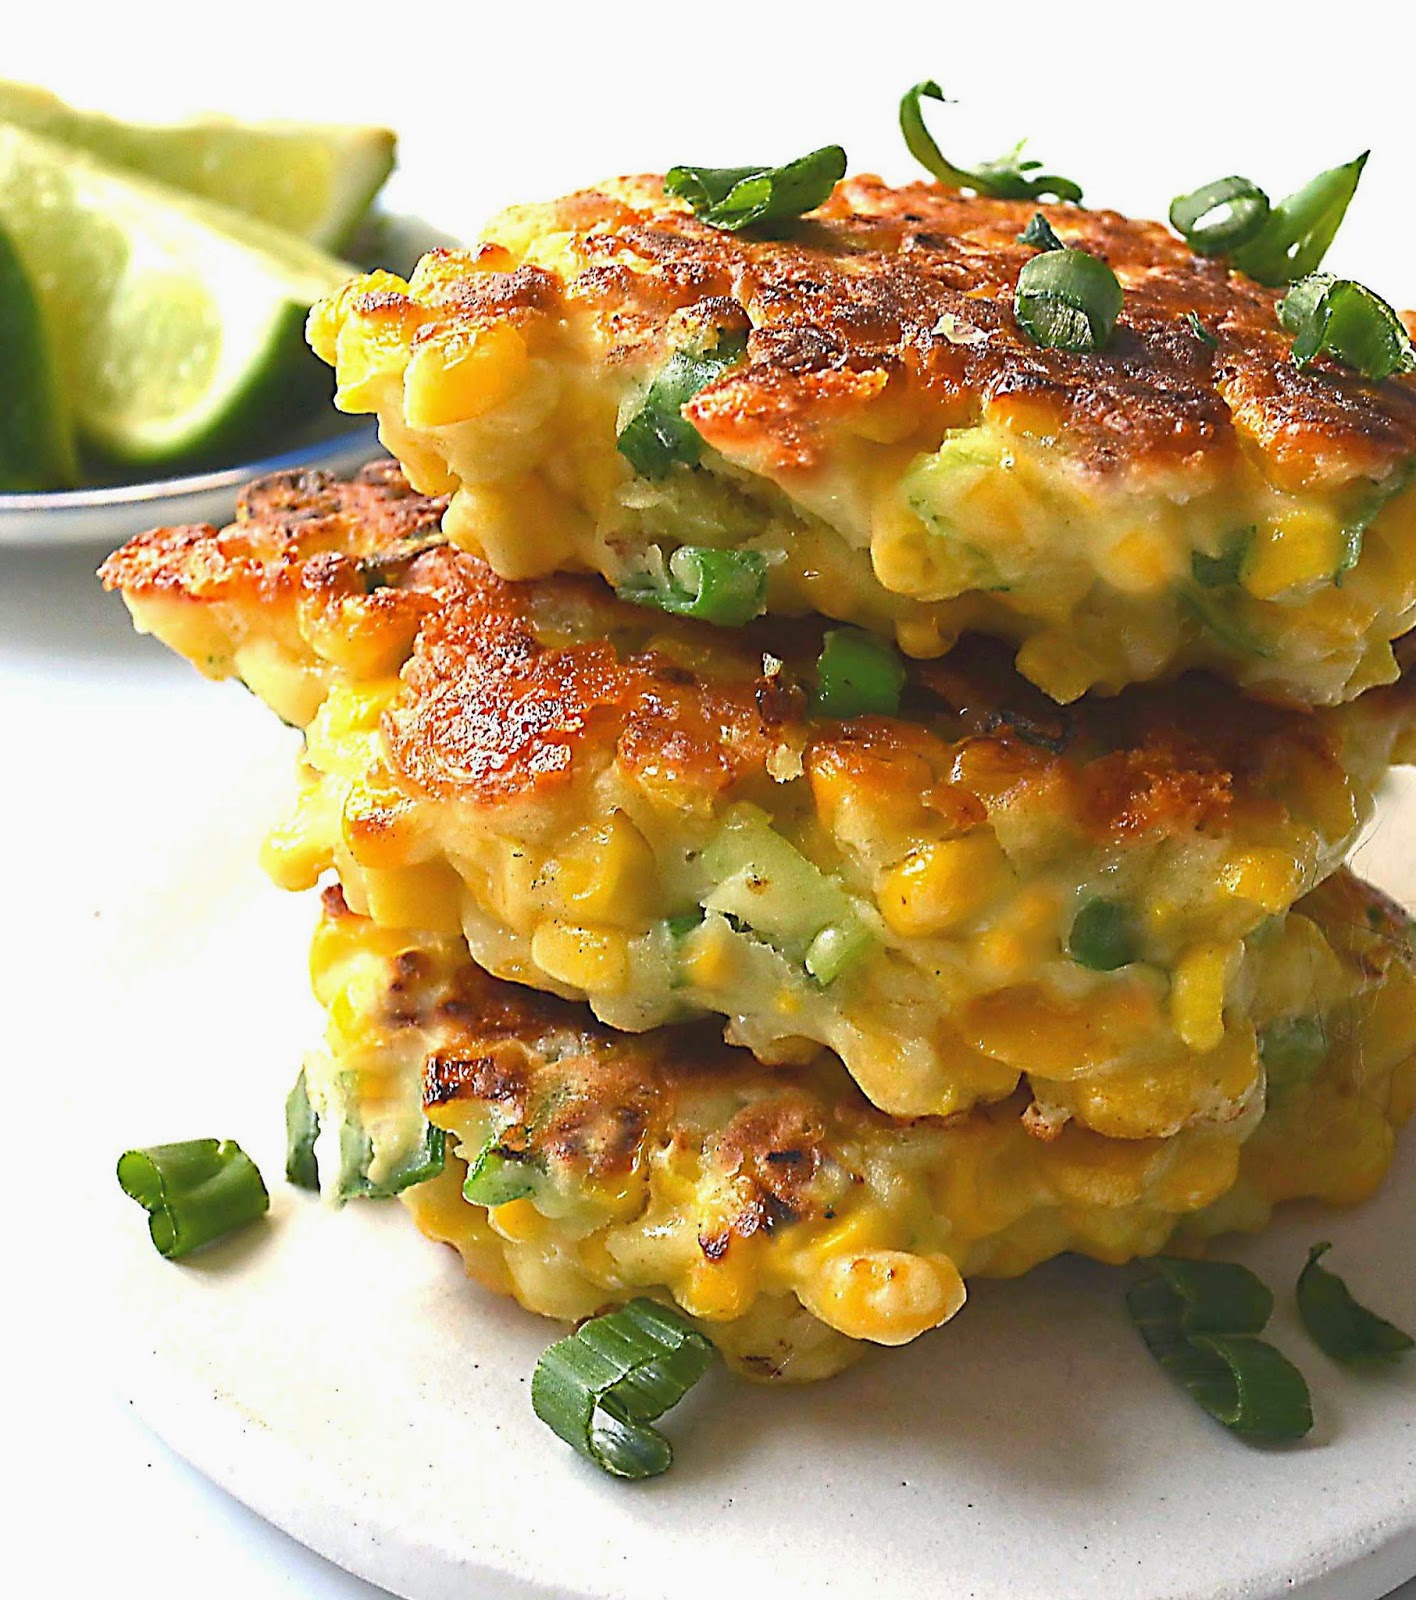 Sew French: Mexican Corn Cakes with Jalapeno & Lime